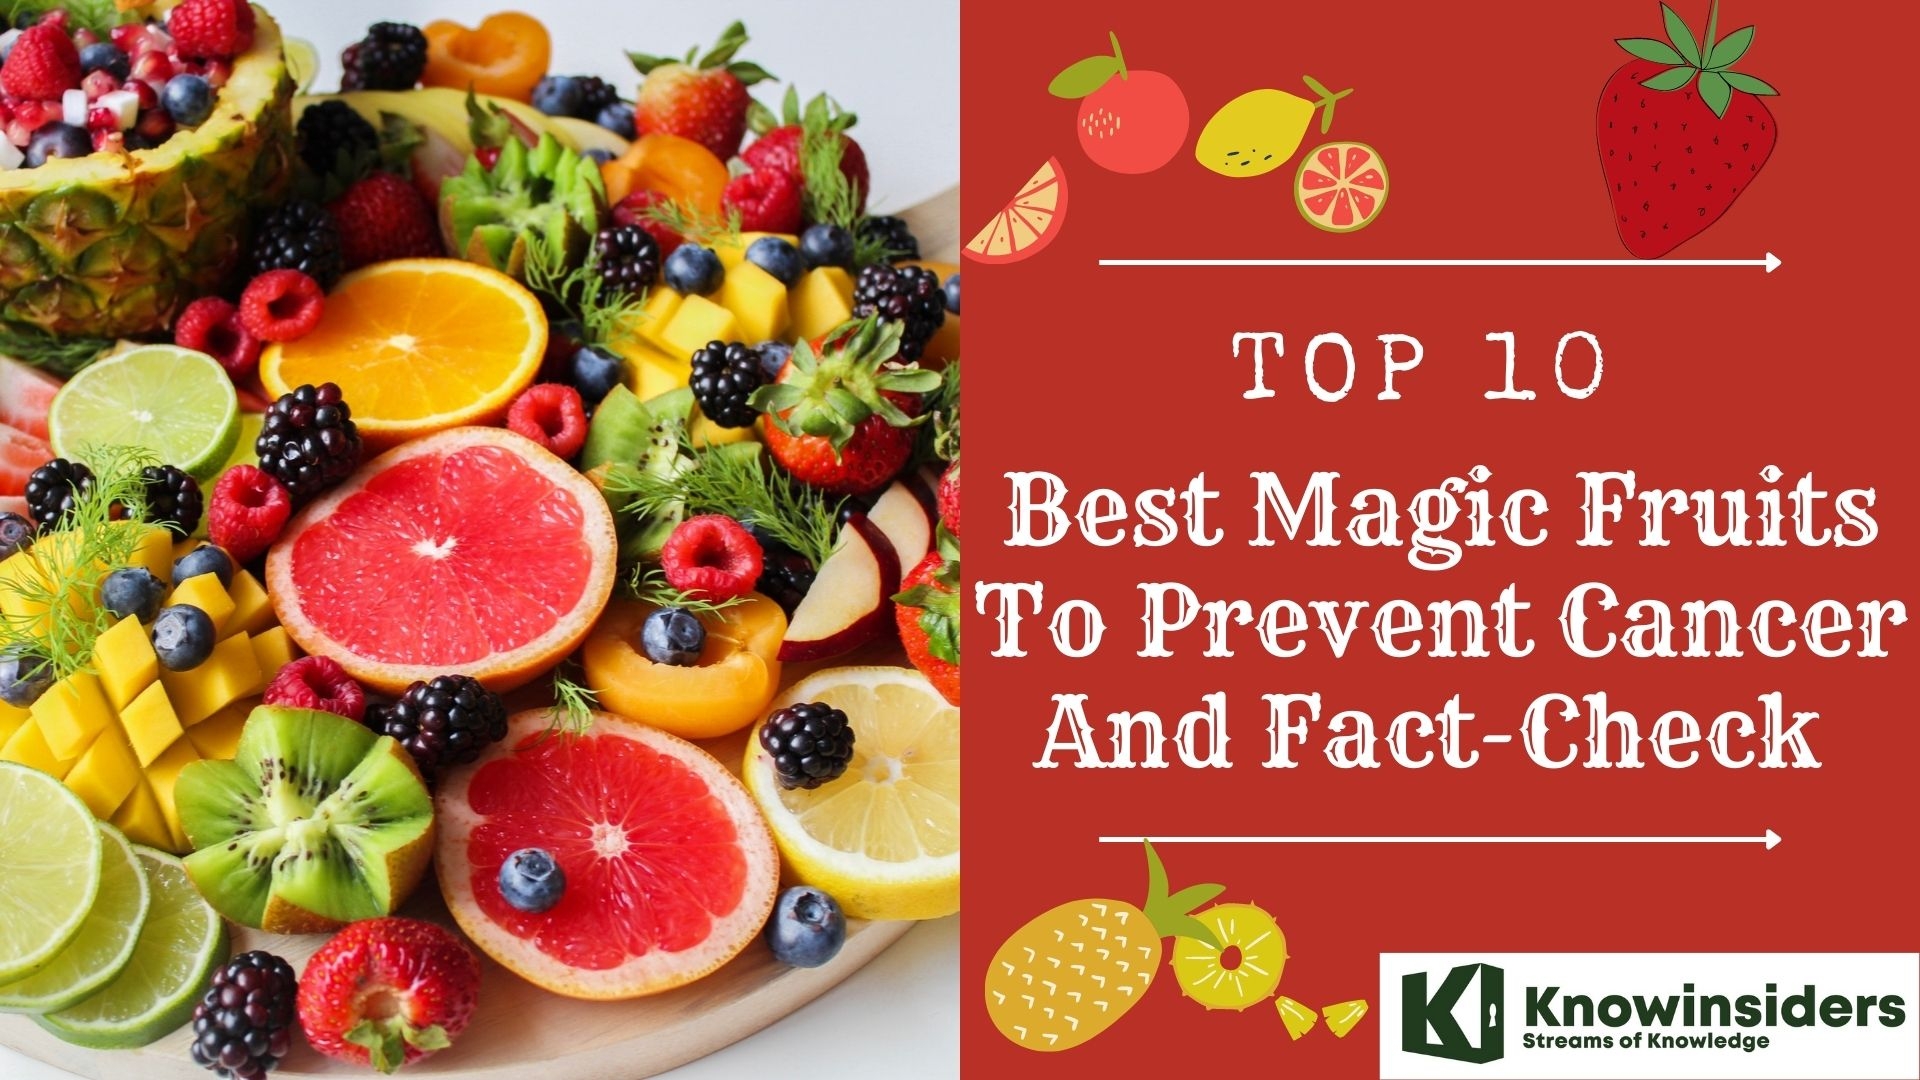 Top 10 Best Magic Fruits To Prevent Cancer And Fact-Check Knowinsiders.com